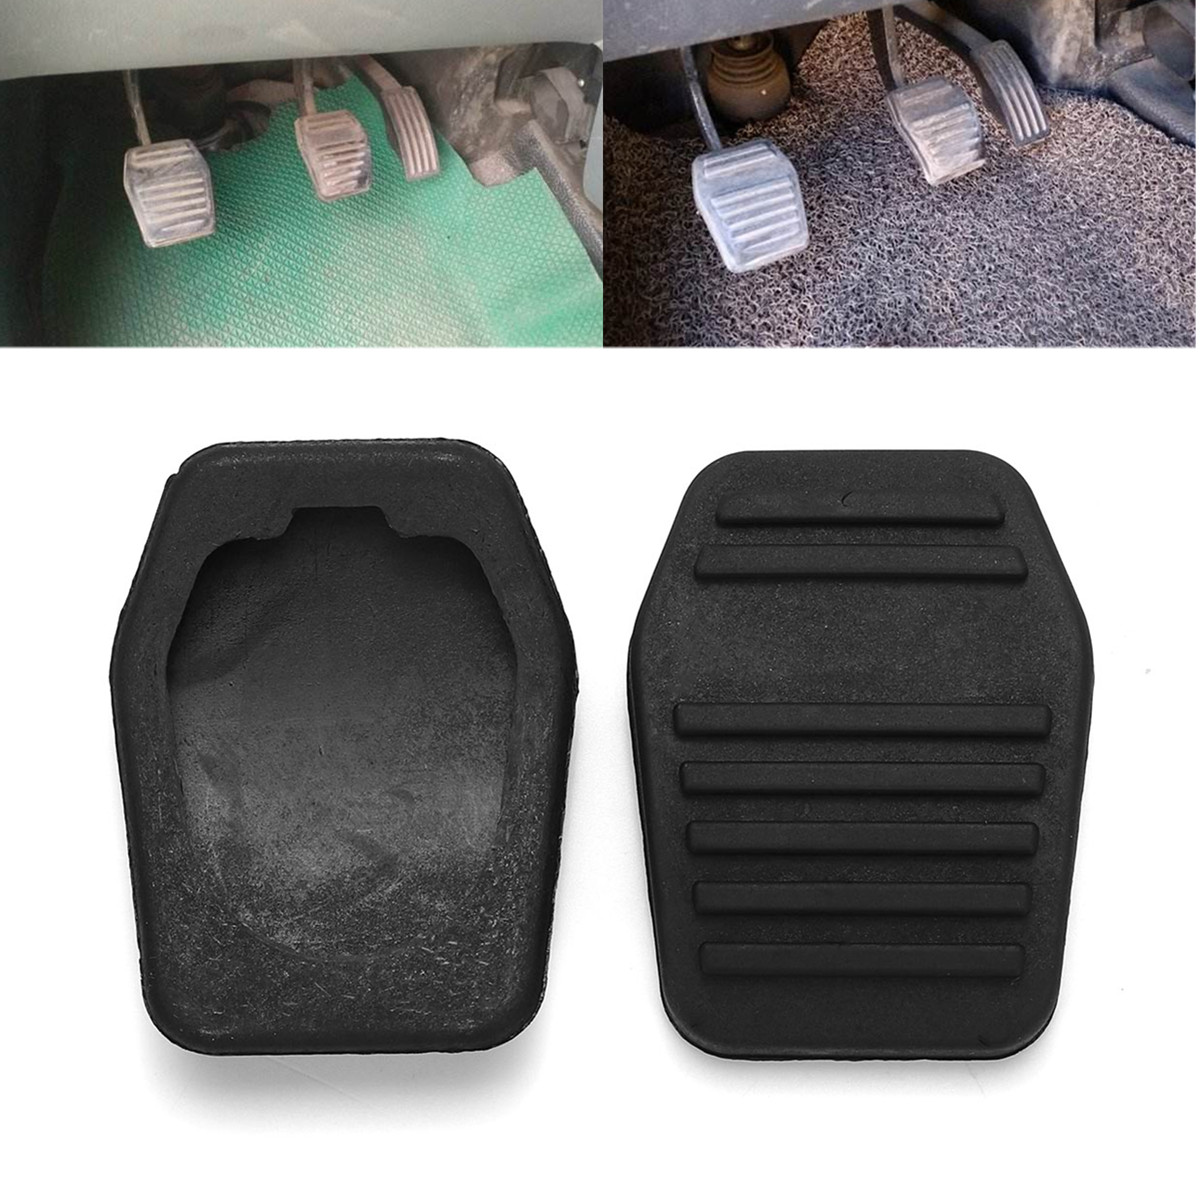 

2Pcs Rubber Non-slip Car Pedal Pad Brake & Clutch Protector Cover for Ford Transit MK6 MK7